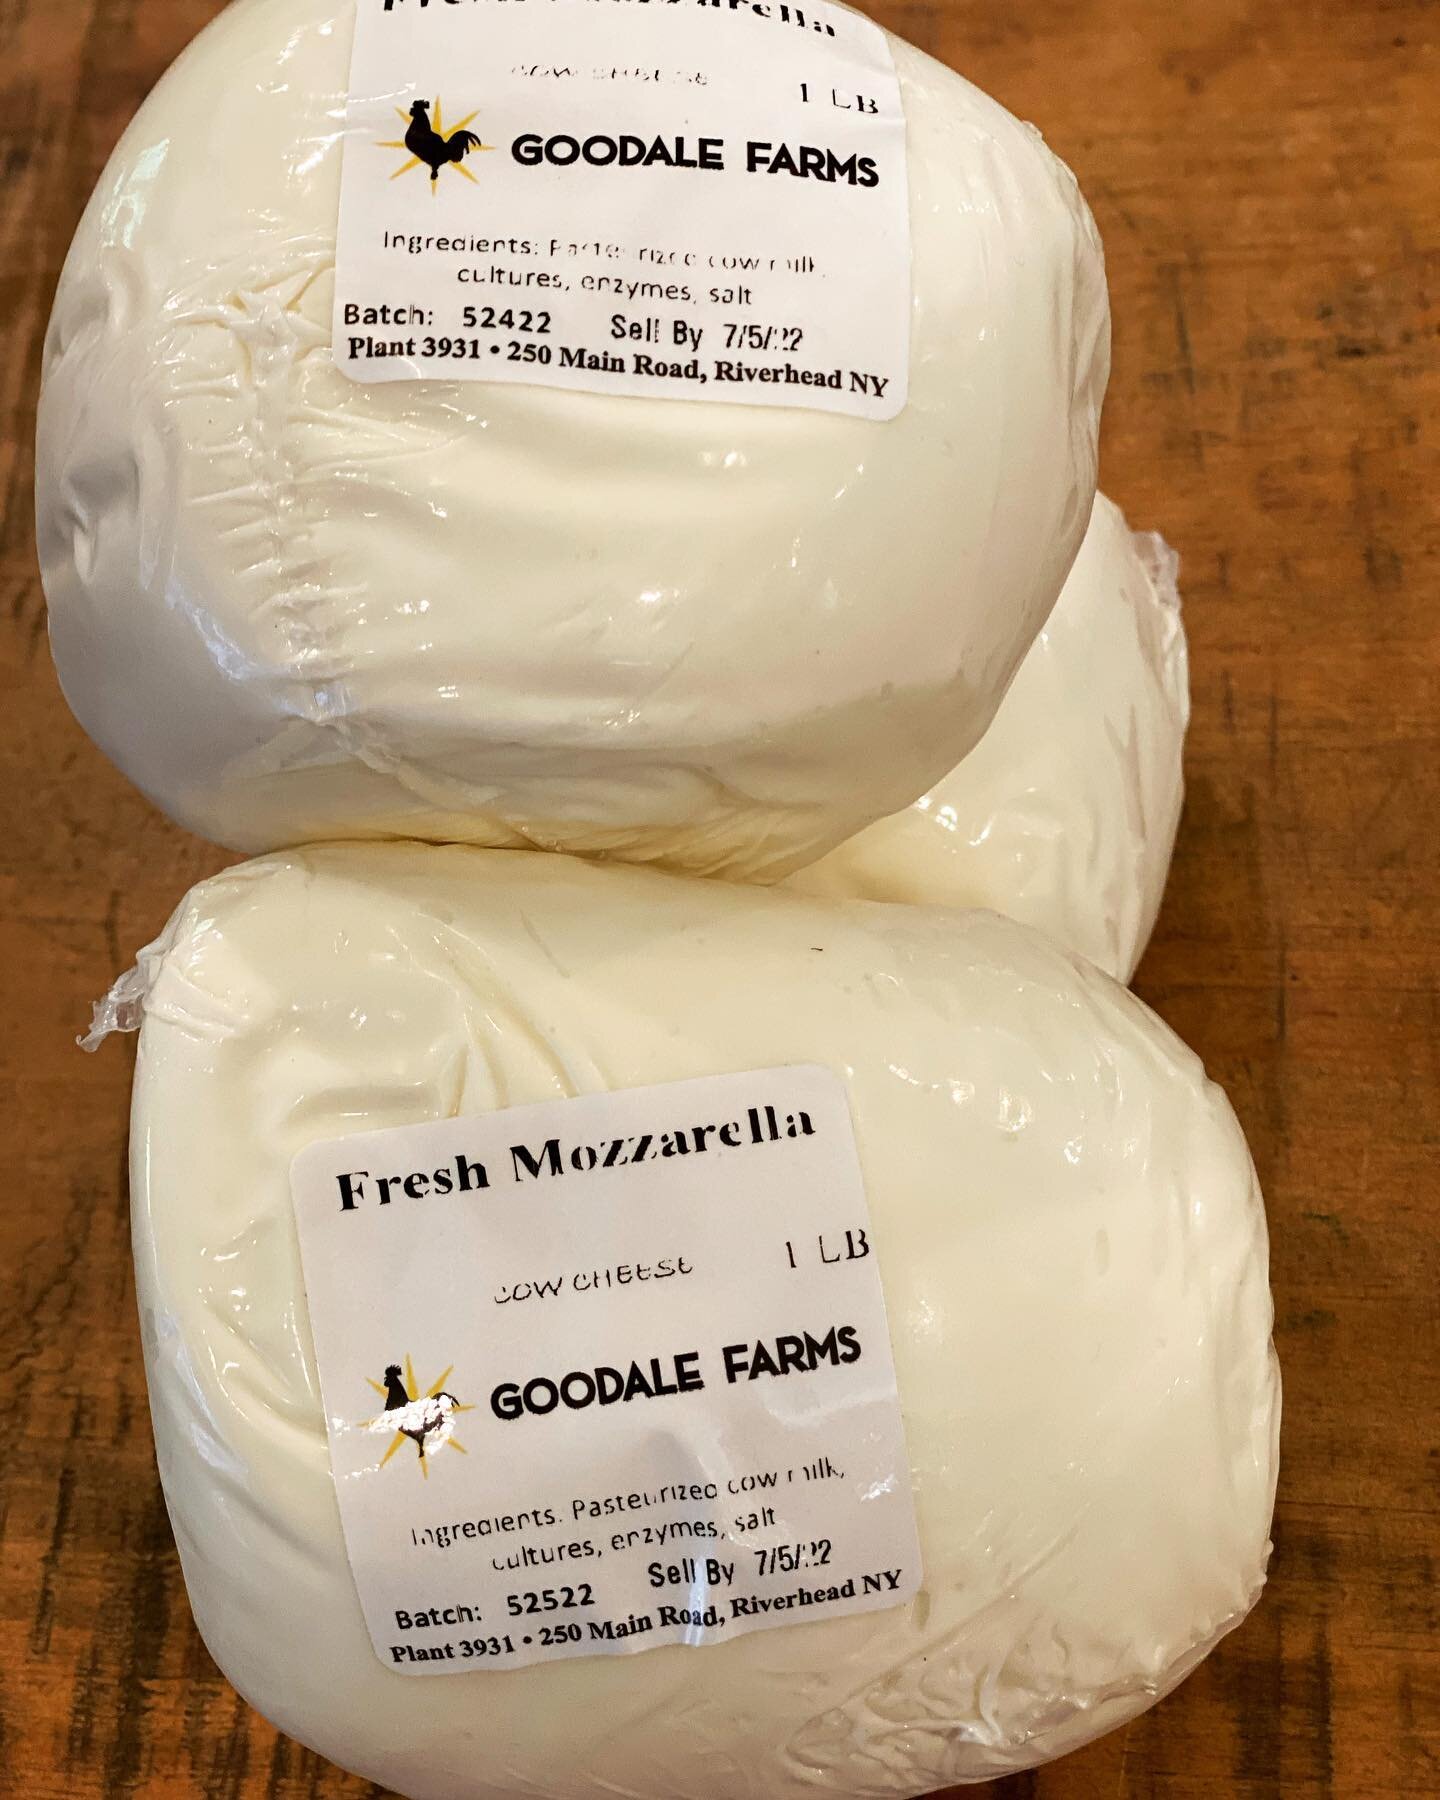 Just in from the Farm. Get some for the weekend! #mozzarella #cheese #mozzarellaandtomato #local #localfarm #goodalefarms #fresh #shoplocal #smallbusiness #shopsmall #goodfood #delicious #deliciousfood #party #memorialday #memorialdayweekend